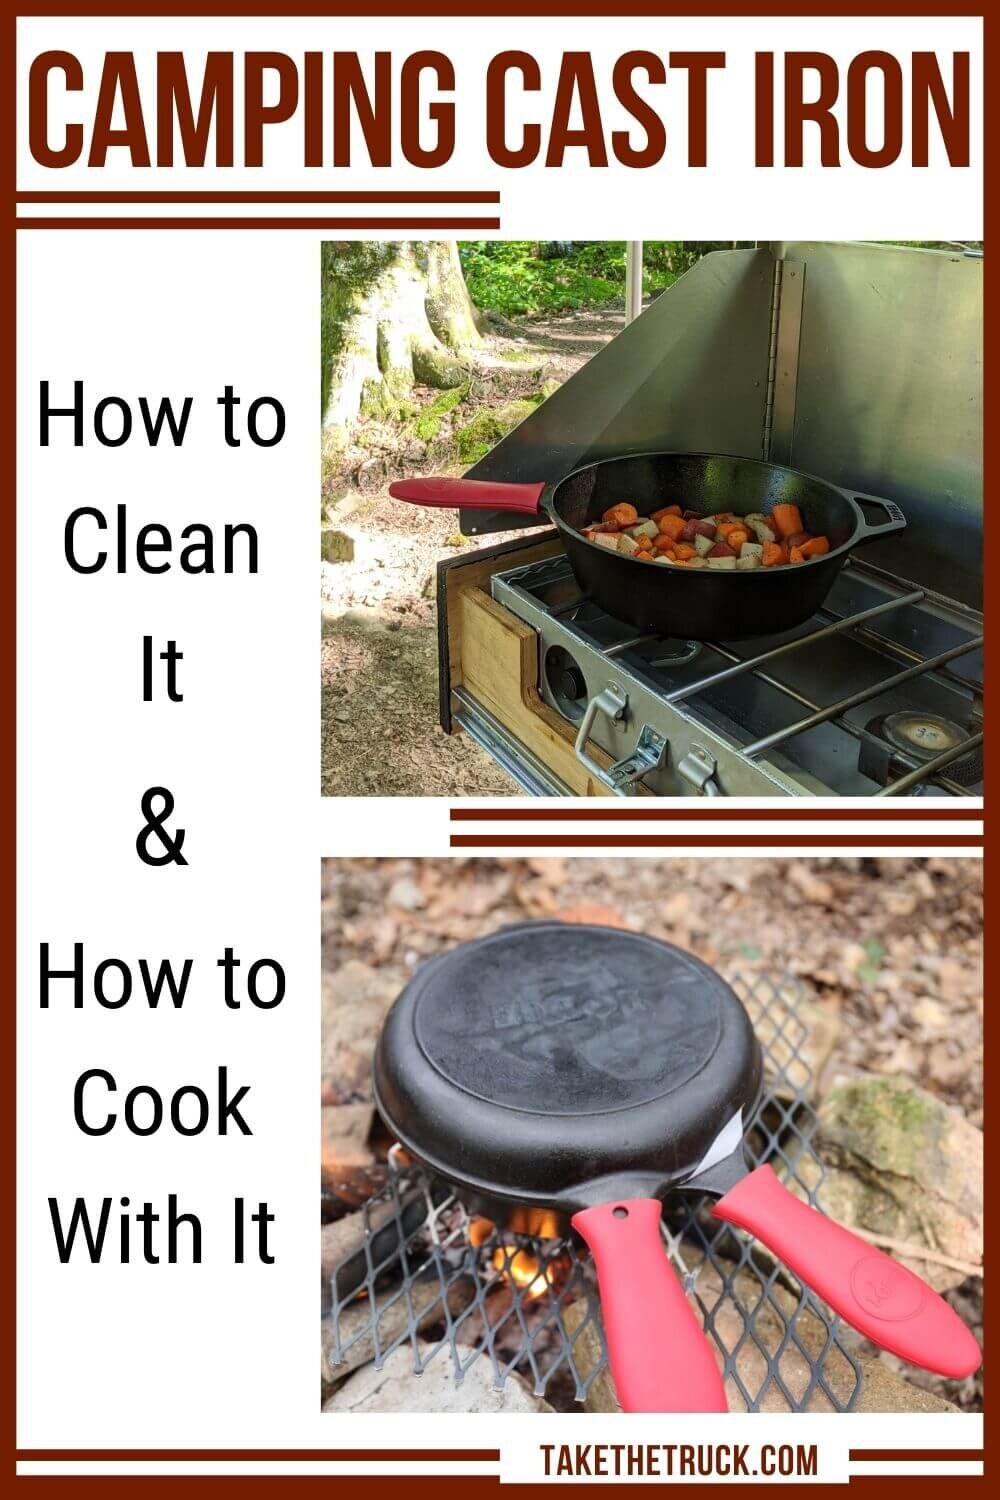 Learn about cast iron for camping - the best cast iron camping cookware and skillet, how to clean cast iron while camping, cast iron storage ideas for camping, cast iron campfire cooking.